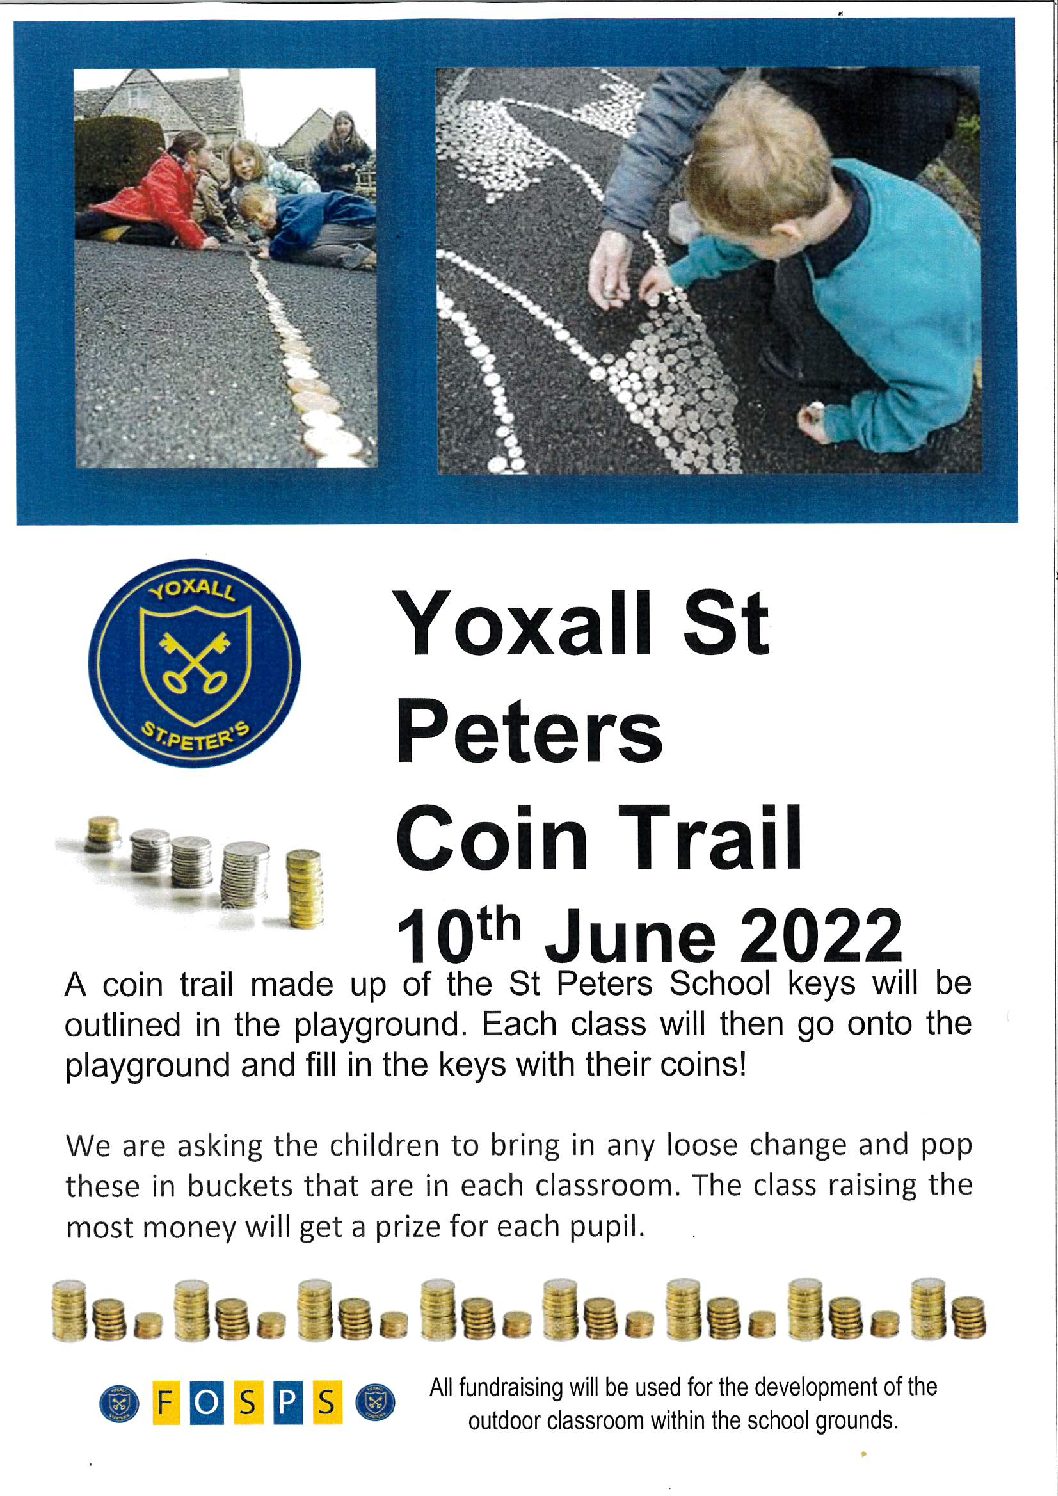 Coin Trail – Friday, 10th June 2022